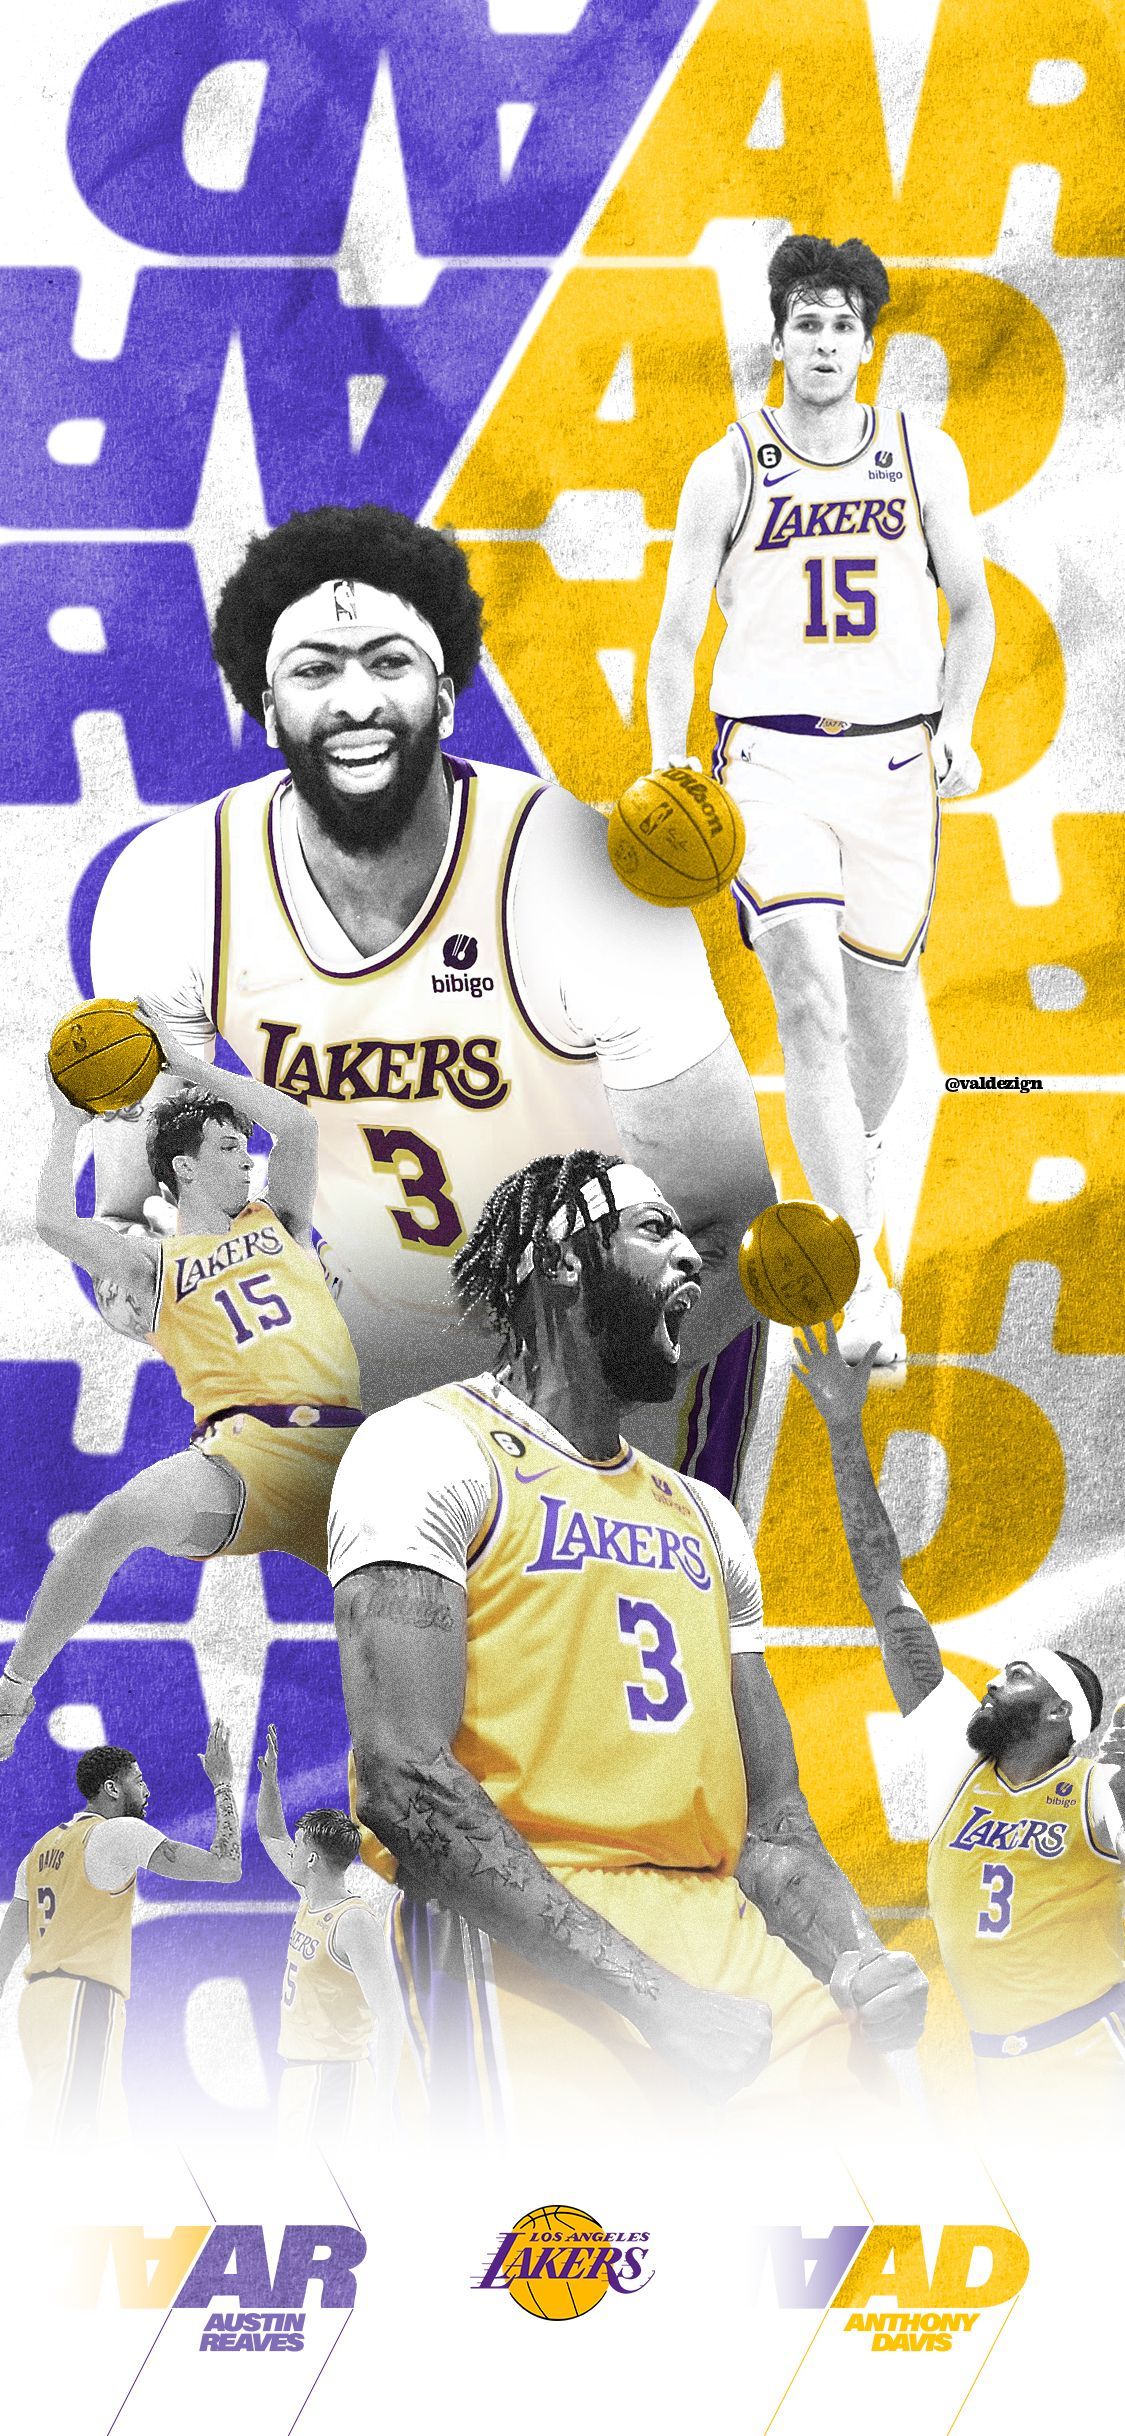 Lakers wallpaper I made for my phone! - Los Angeles Lakers